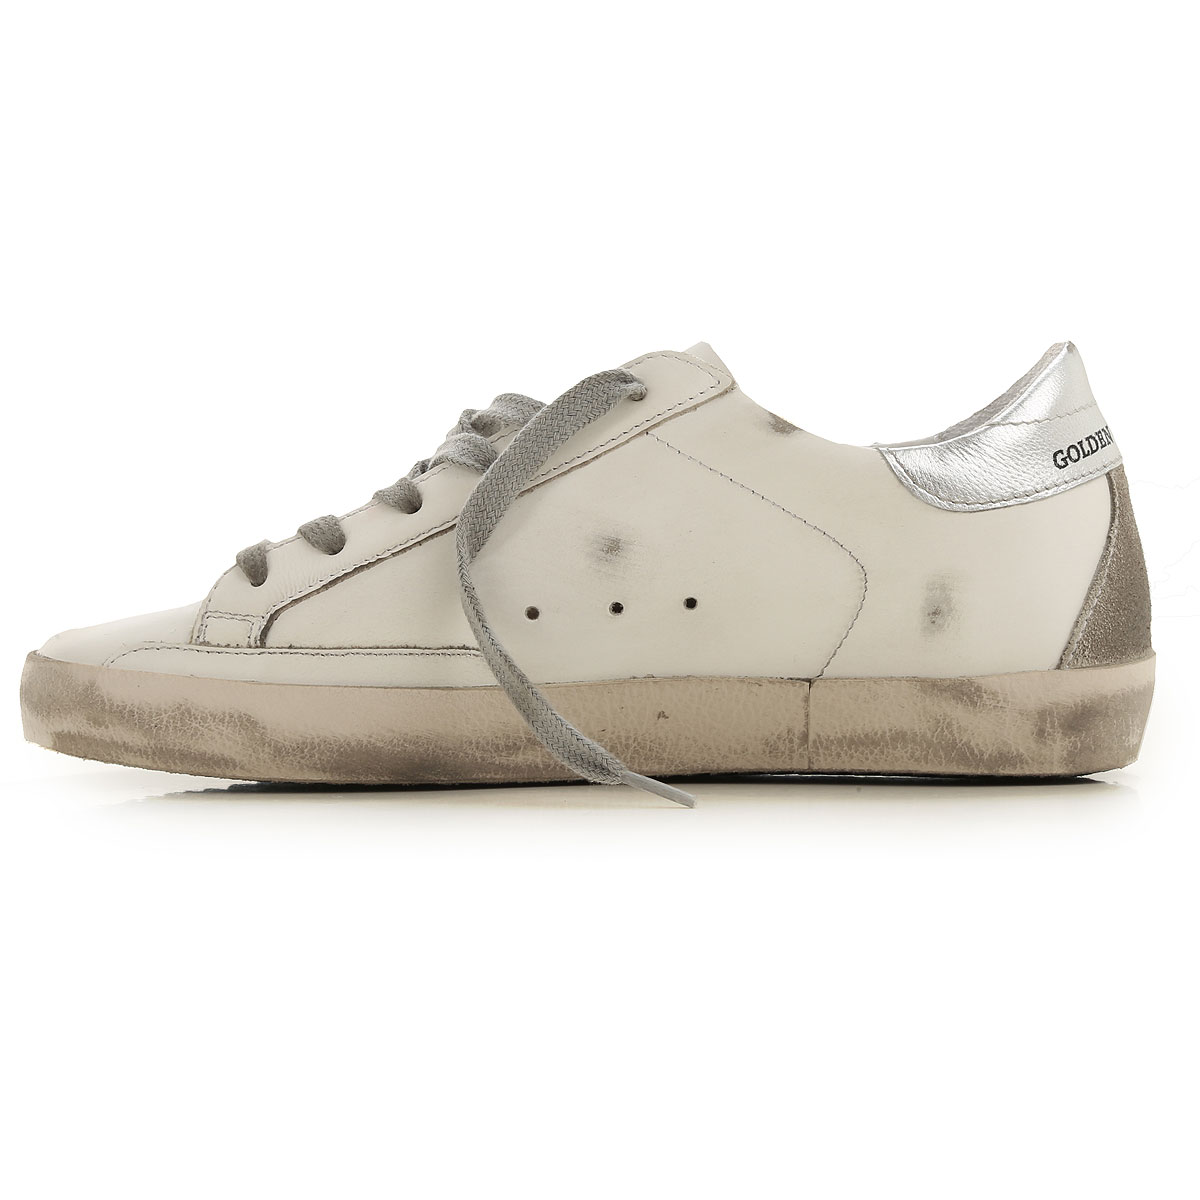 Womens Shoes Golden Goose, Style code: gwf00102-f000317-10273